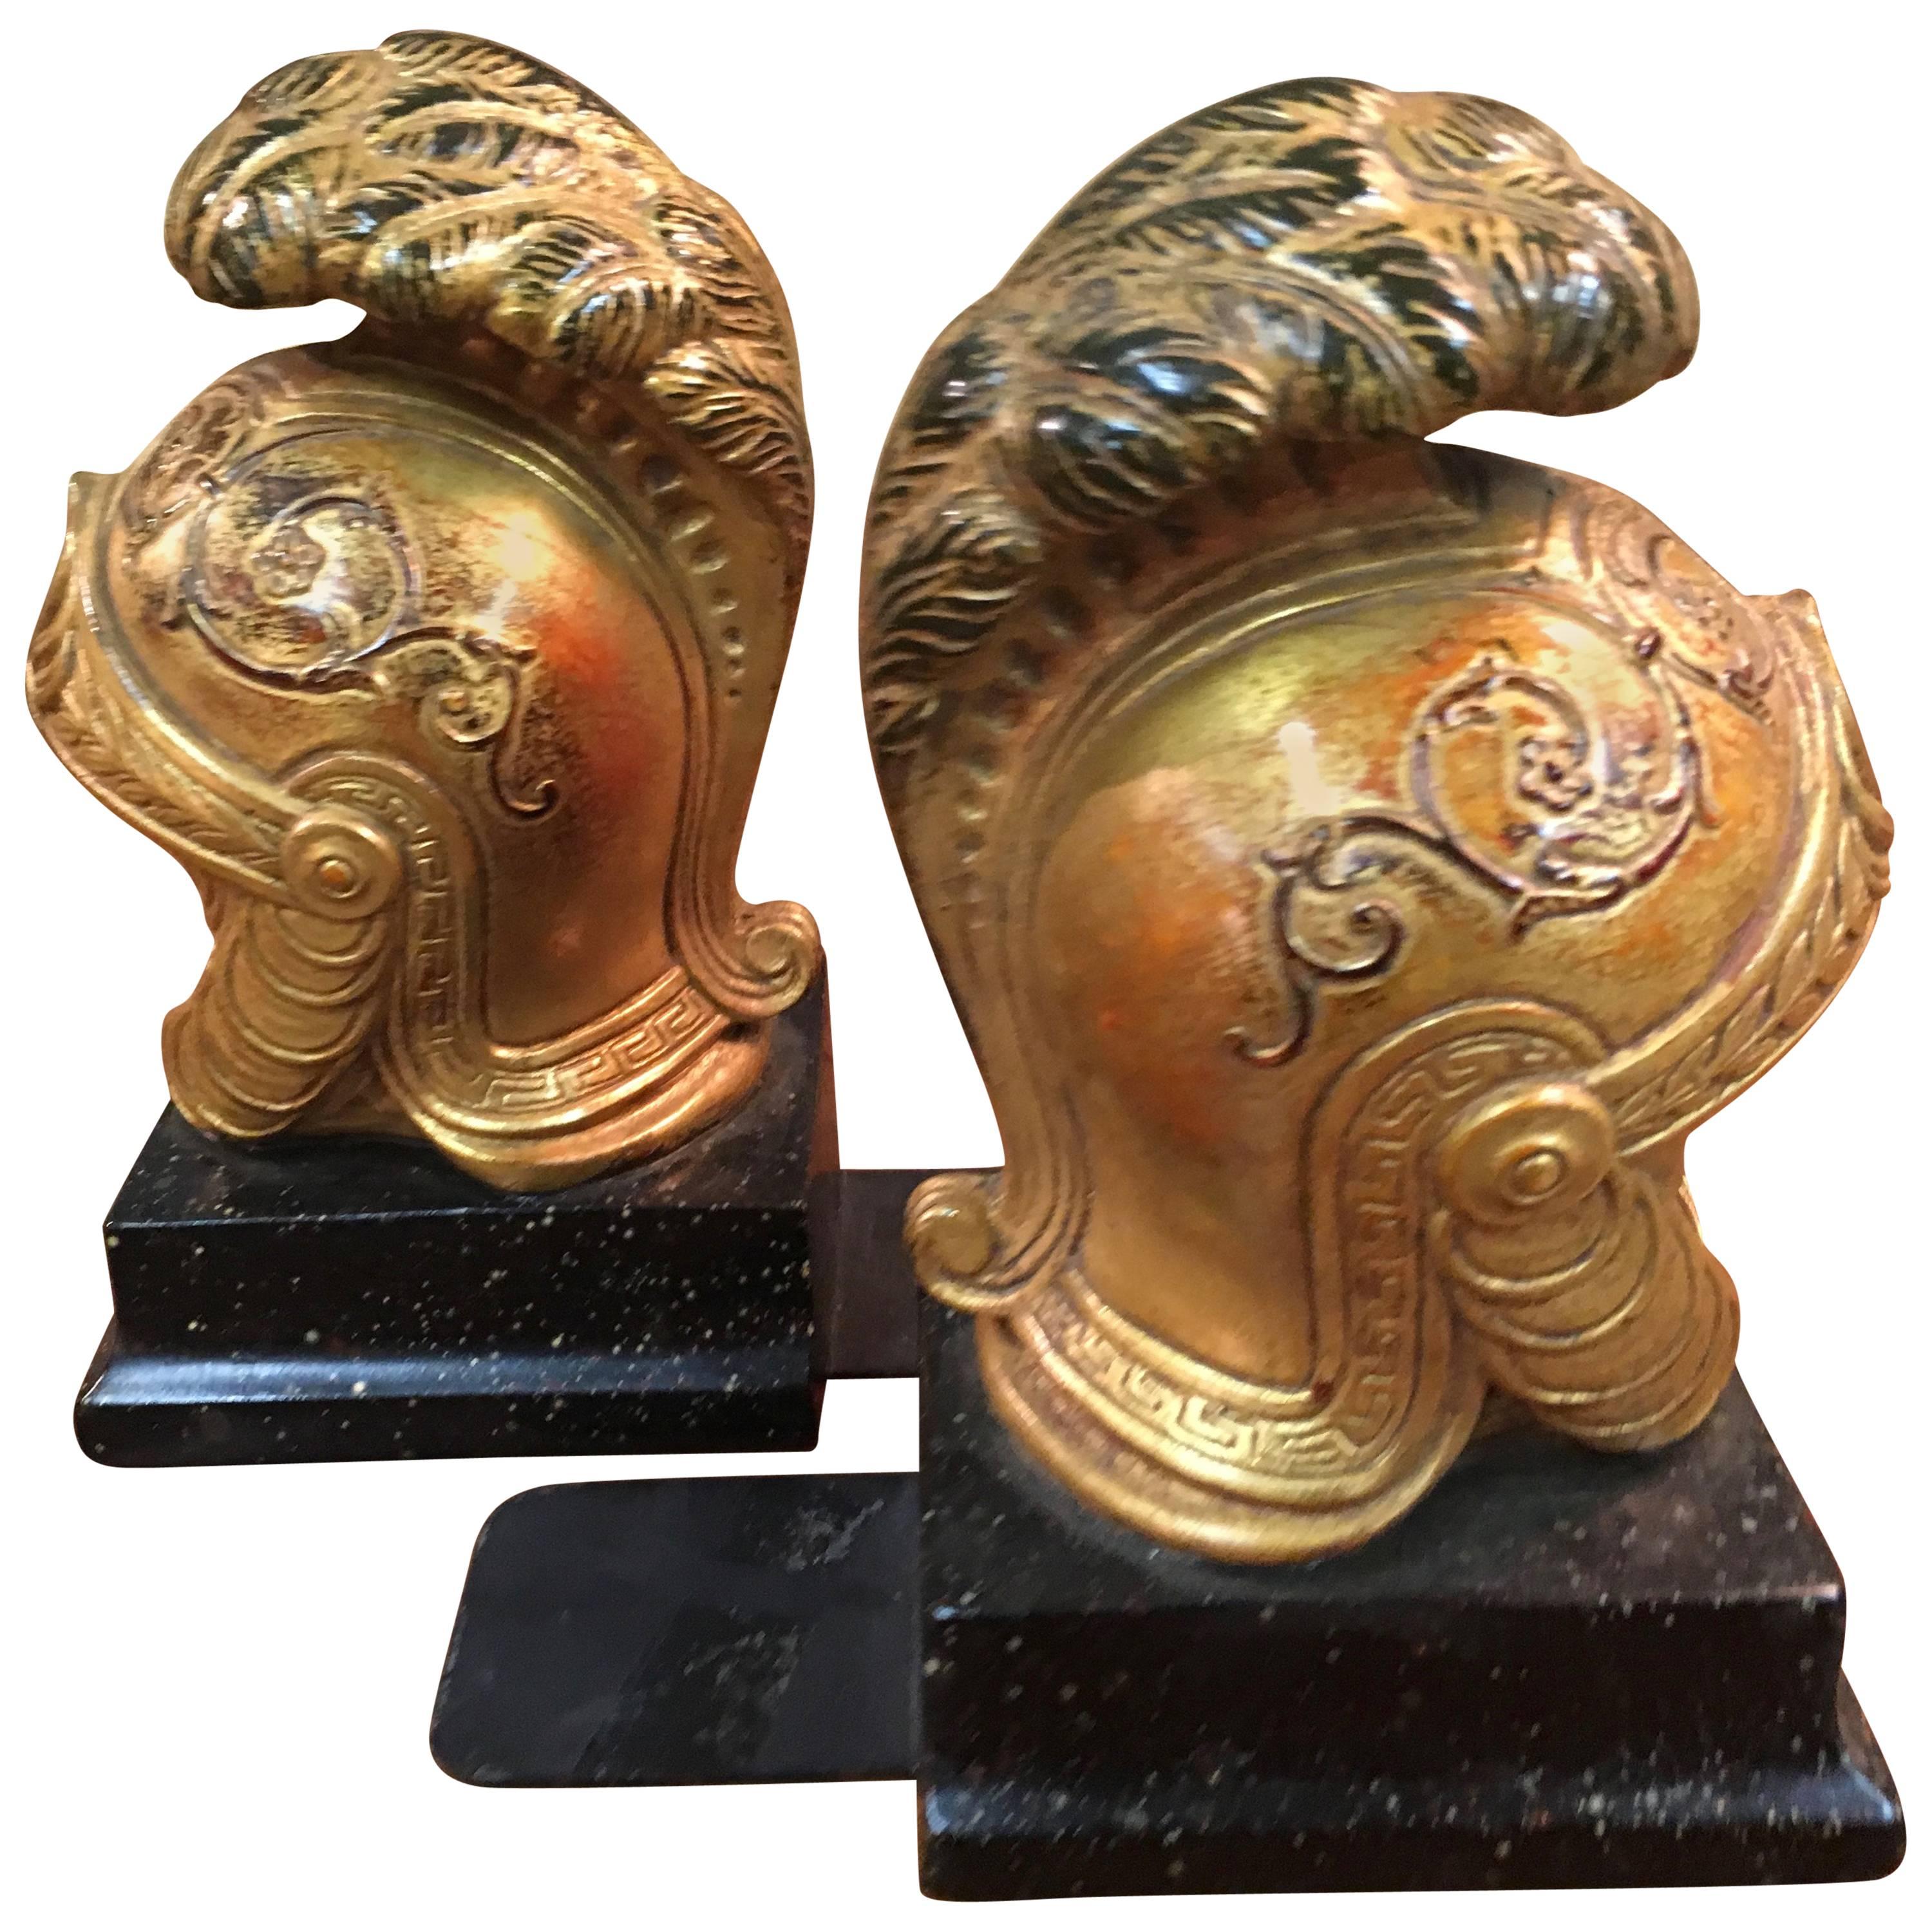 Pair of Gilt Roman Galea Bookends by Borghese